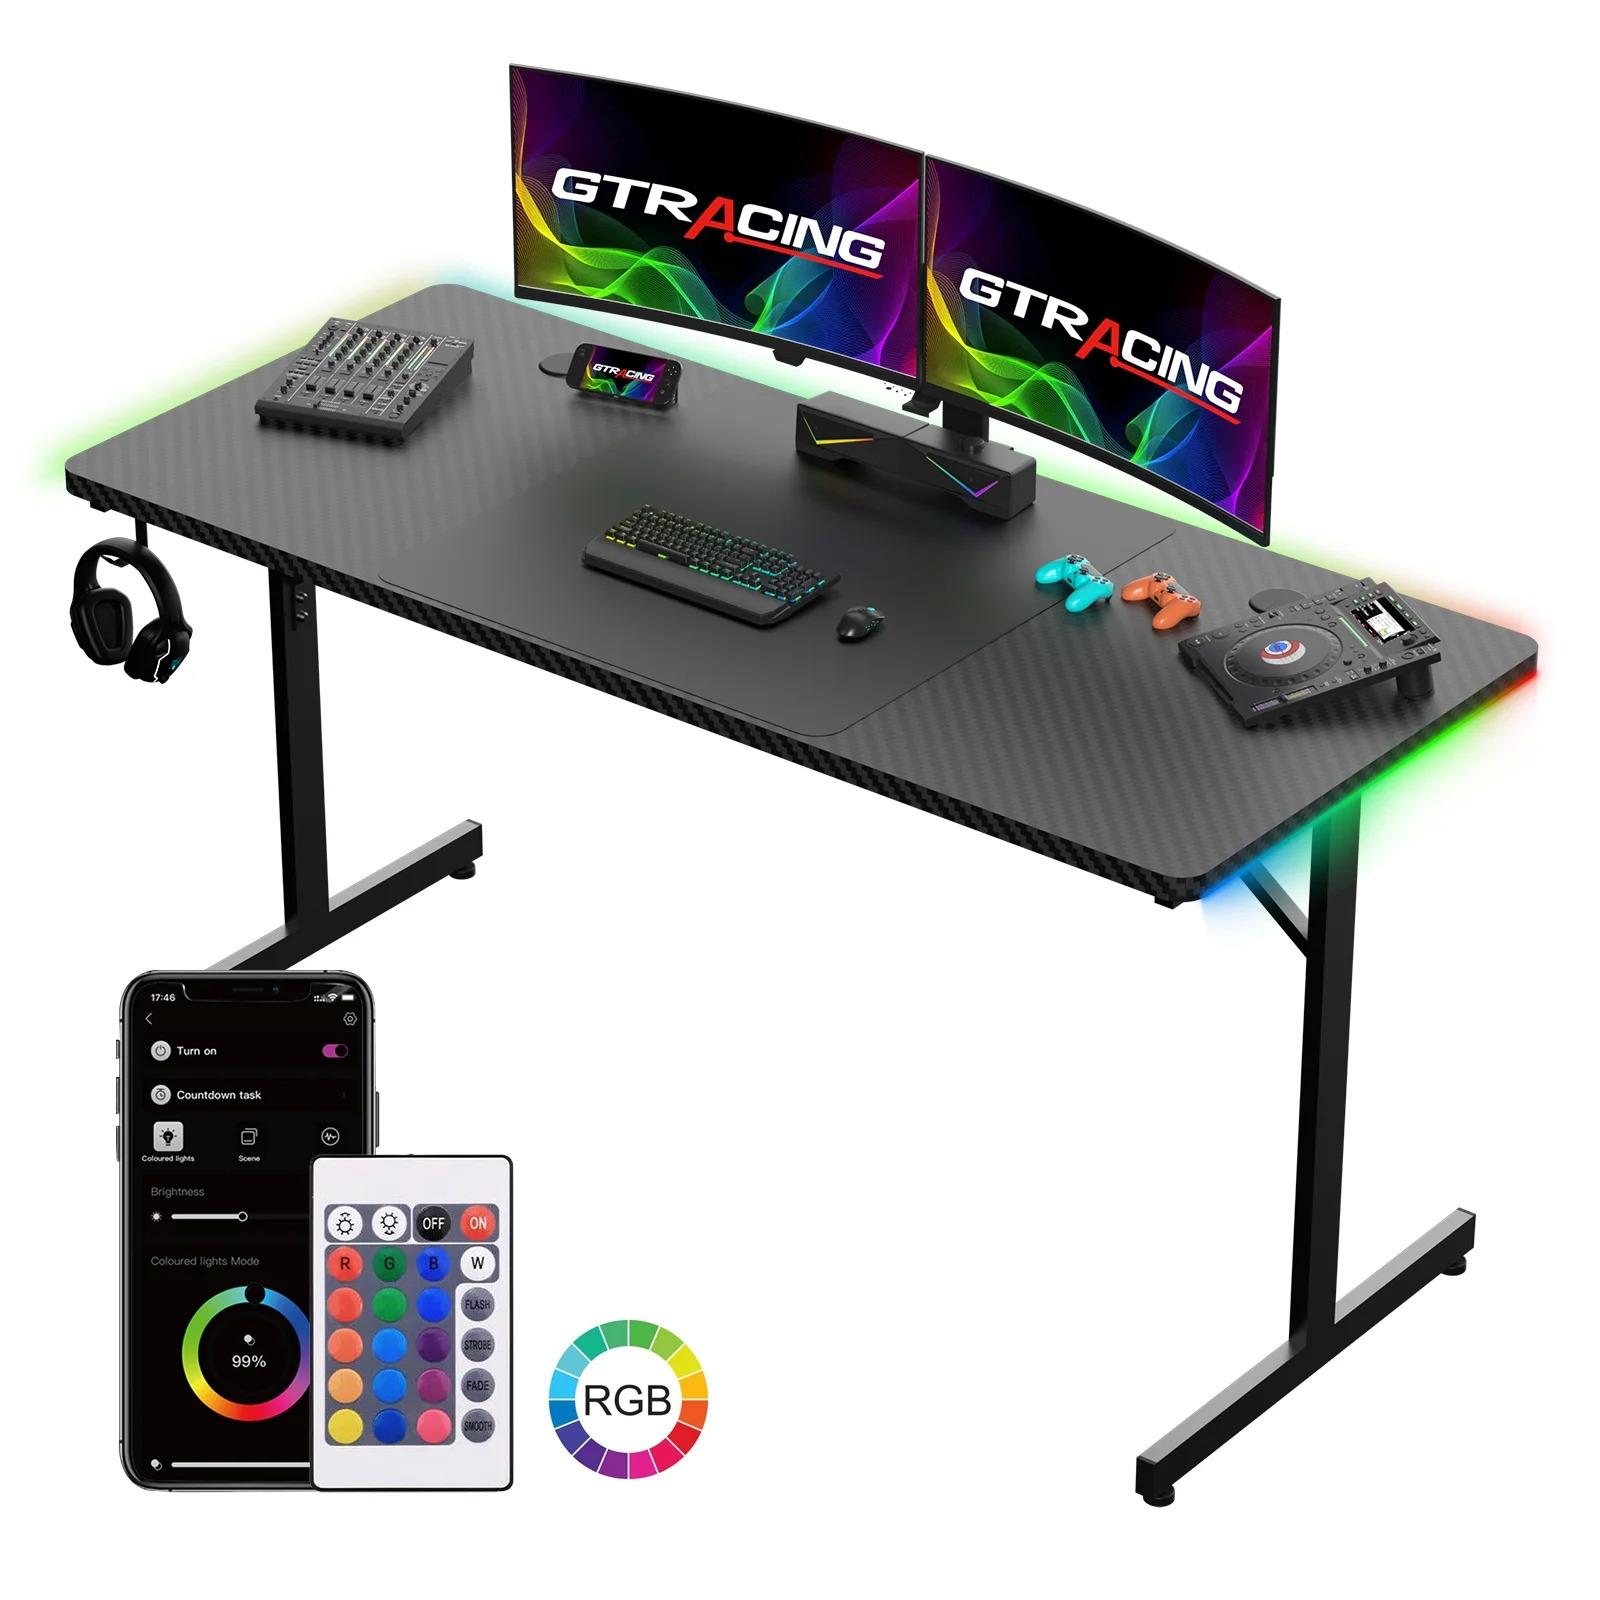 55in Large RGB Gaming Desk with Mouse Pad T-Shaped Office Desk for $69.99 Shipped